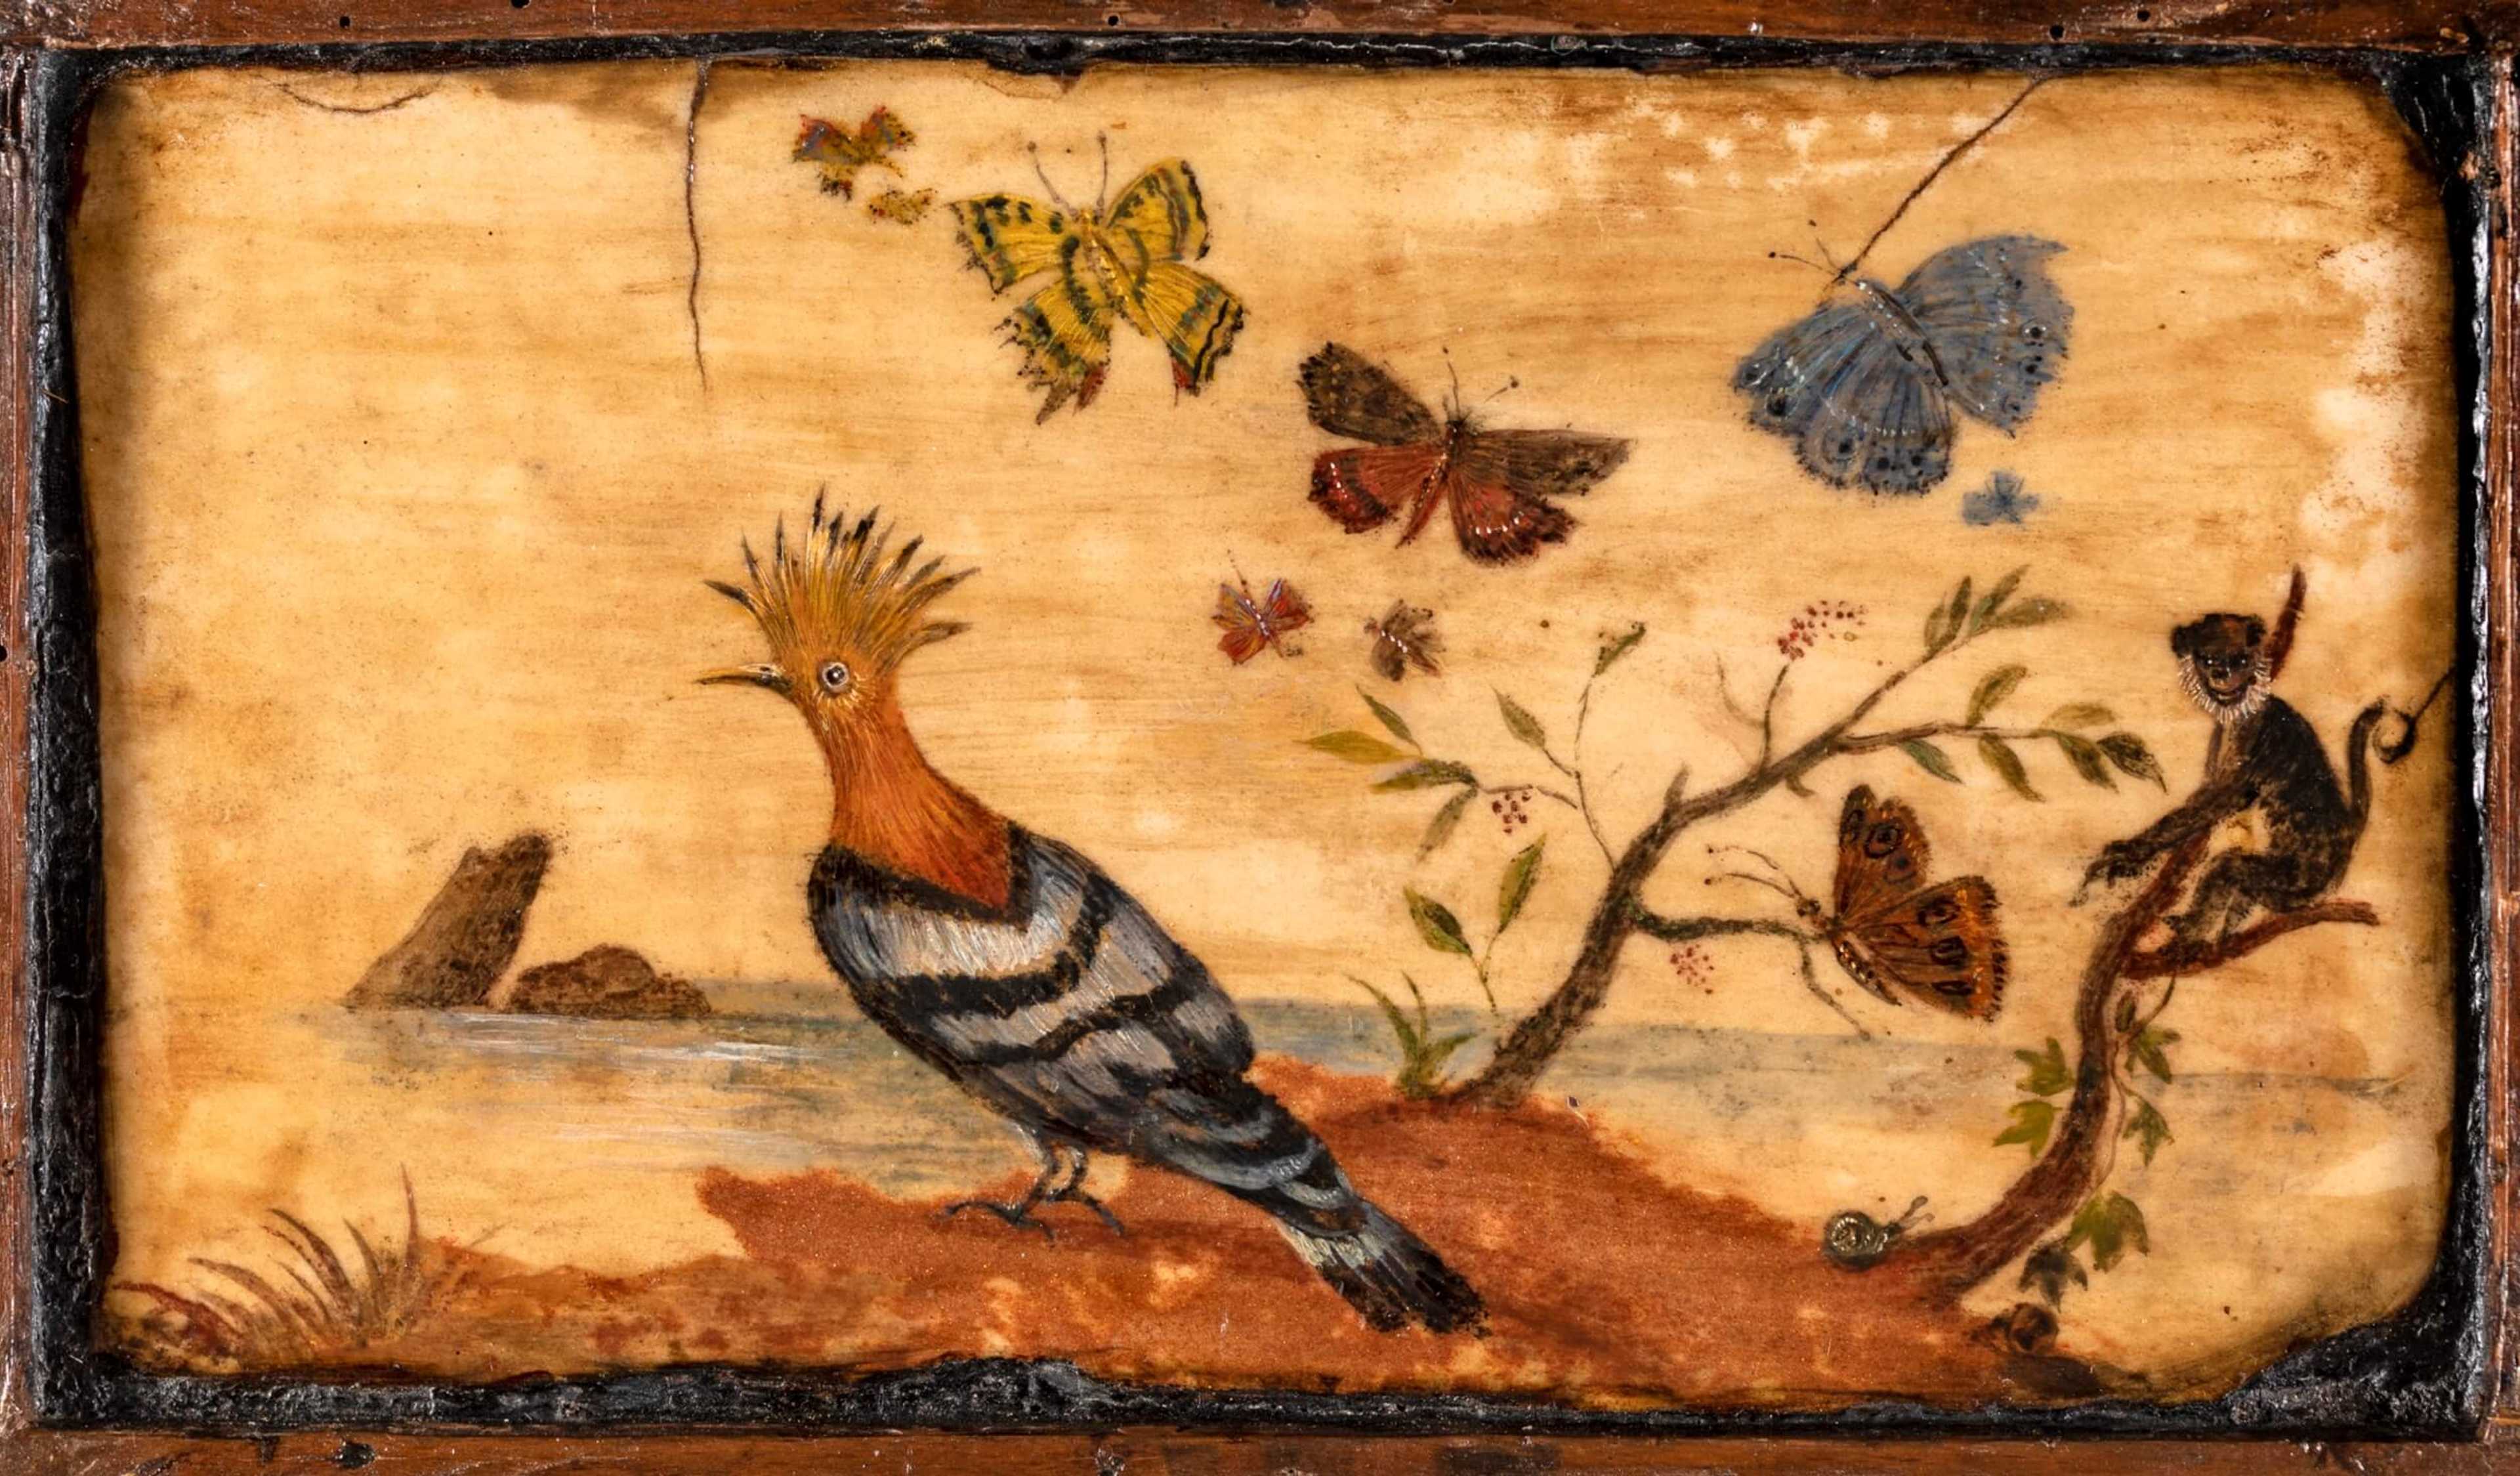 Still life and landscape with hoopoe, monkey and butterflies